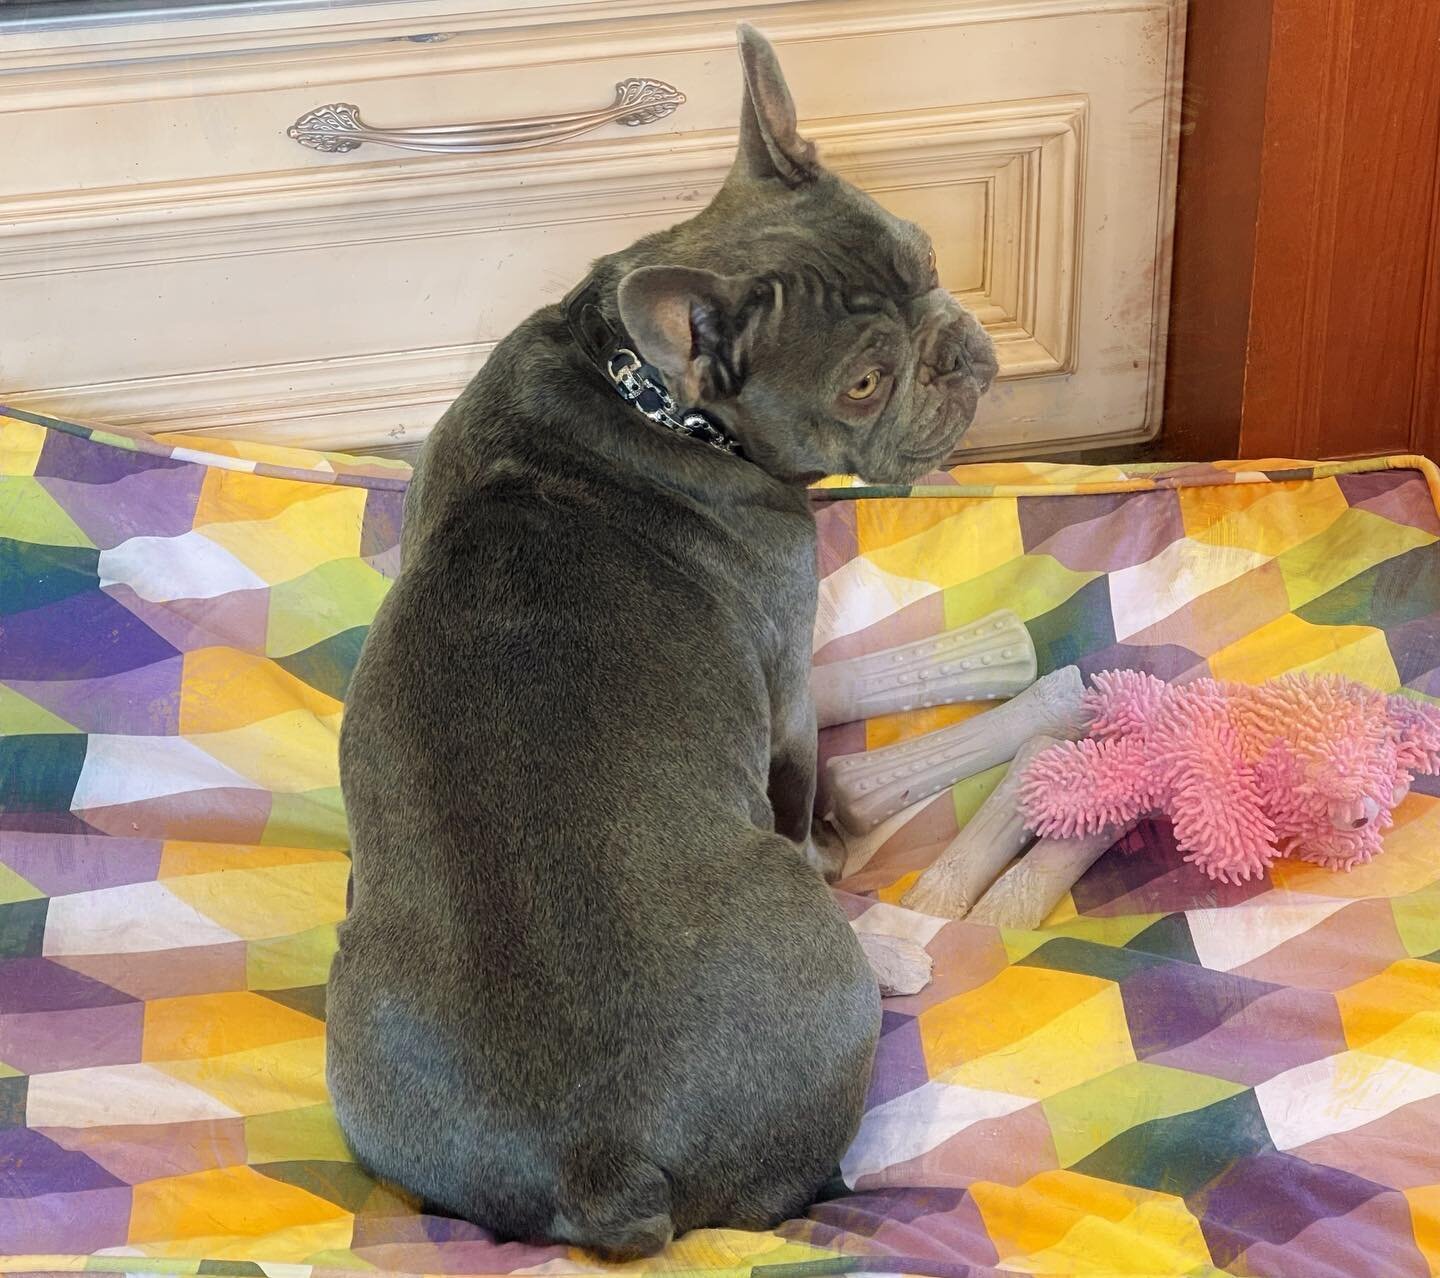 Her favorite pose.

#Frenchies#frenchbulldog#french_bulldogs#frenchbully#frenchbulldogpics#frenchbulldogsrule#frenchbul#frenchiesoverload#frenchie#frenchie_corner#frenchie_photos#frenchiesociety#frenchiesofinstagram#lilacfrenchie#frenchiephoto#french